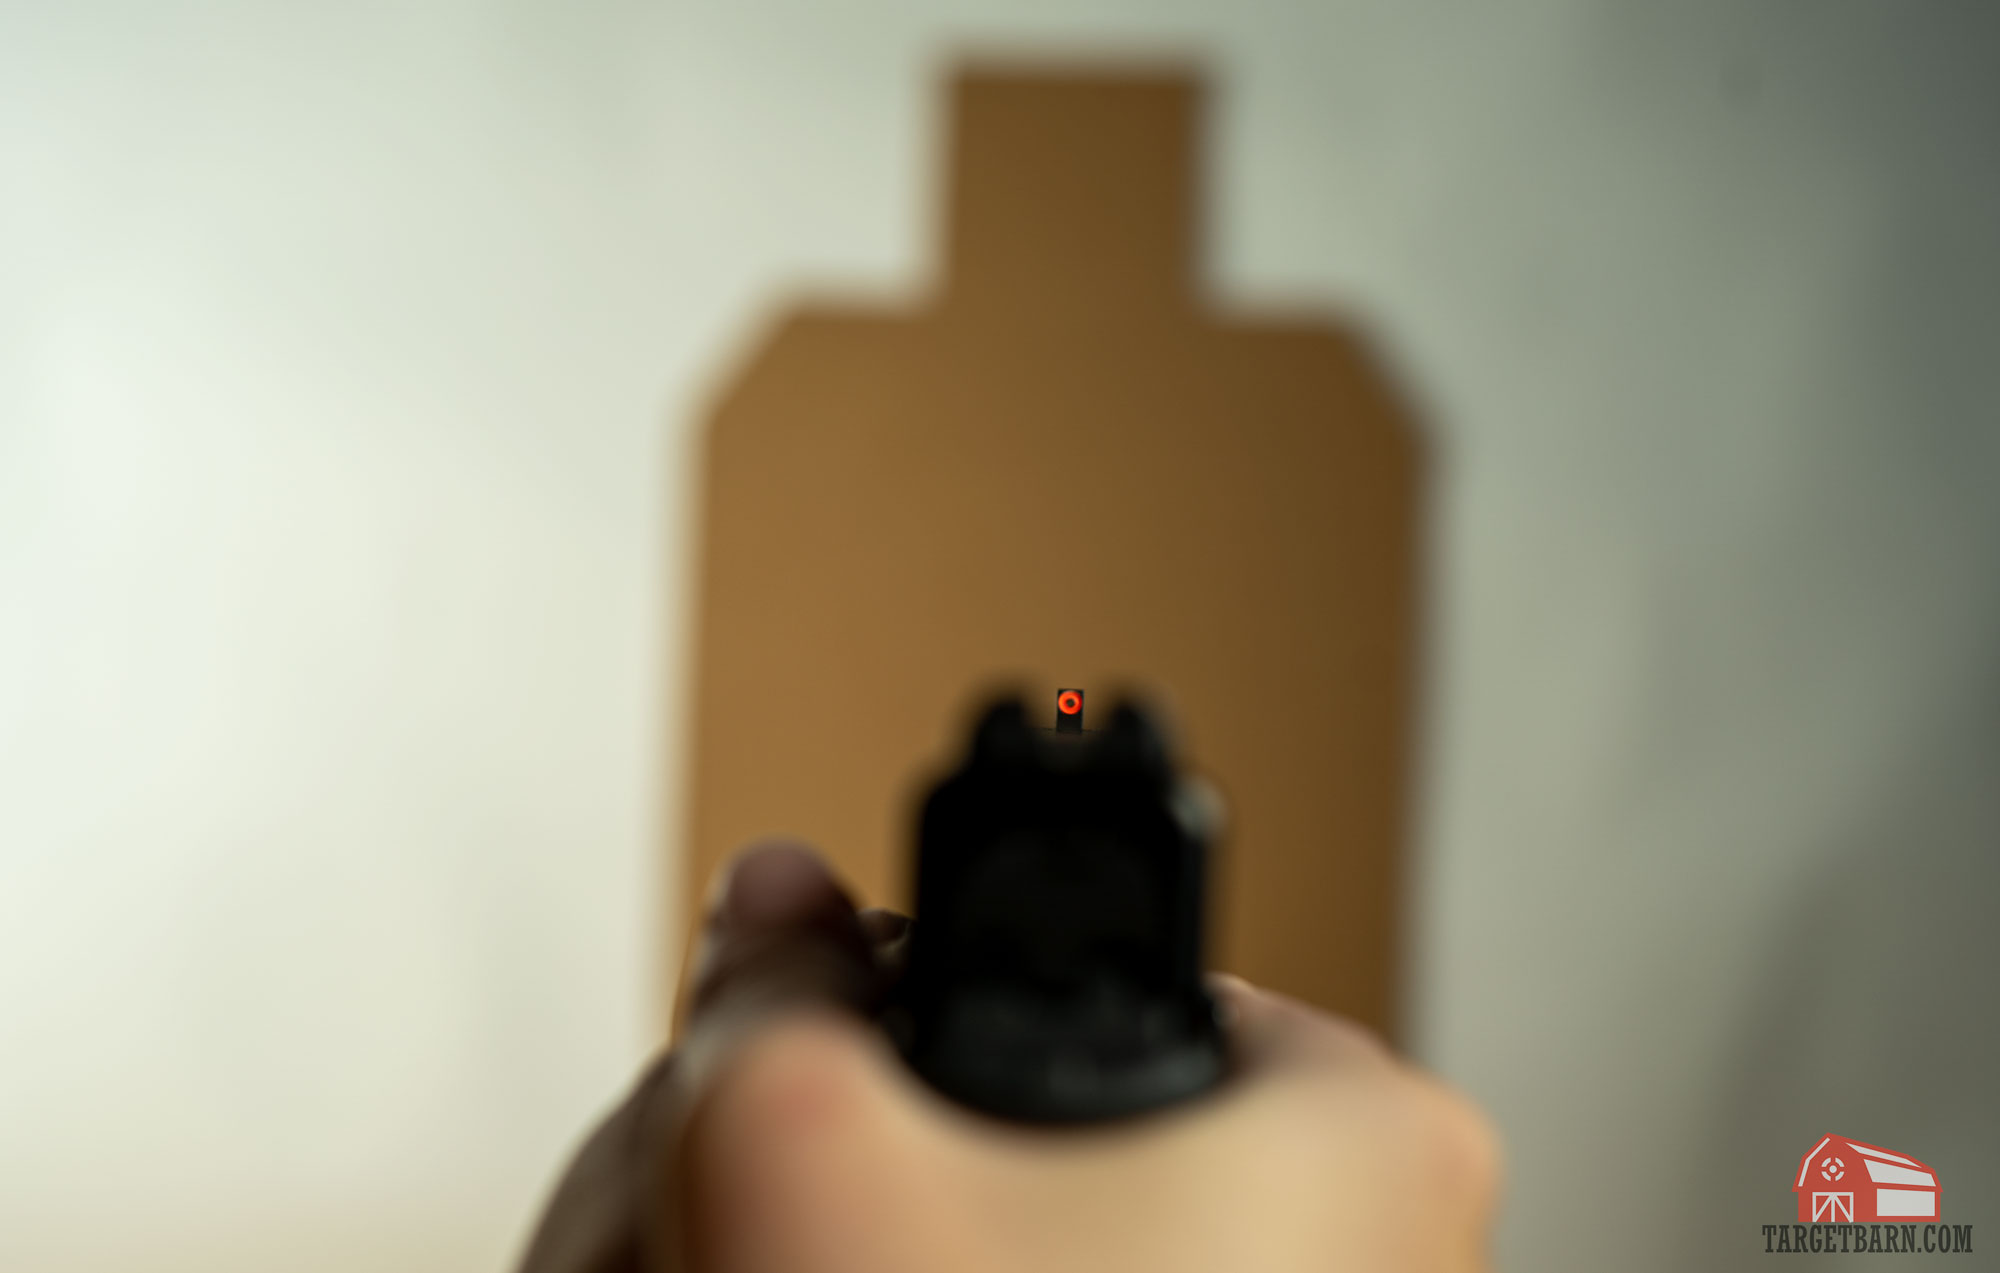 the optimal sight picture has a clear focus on the front sight with a blurry target